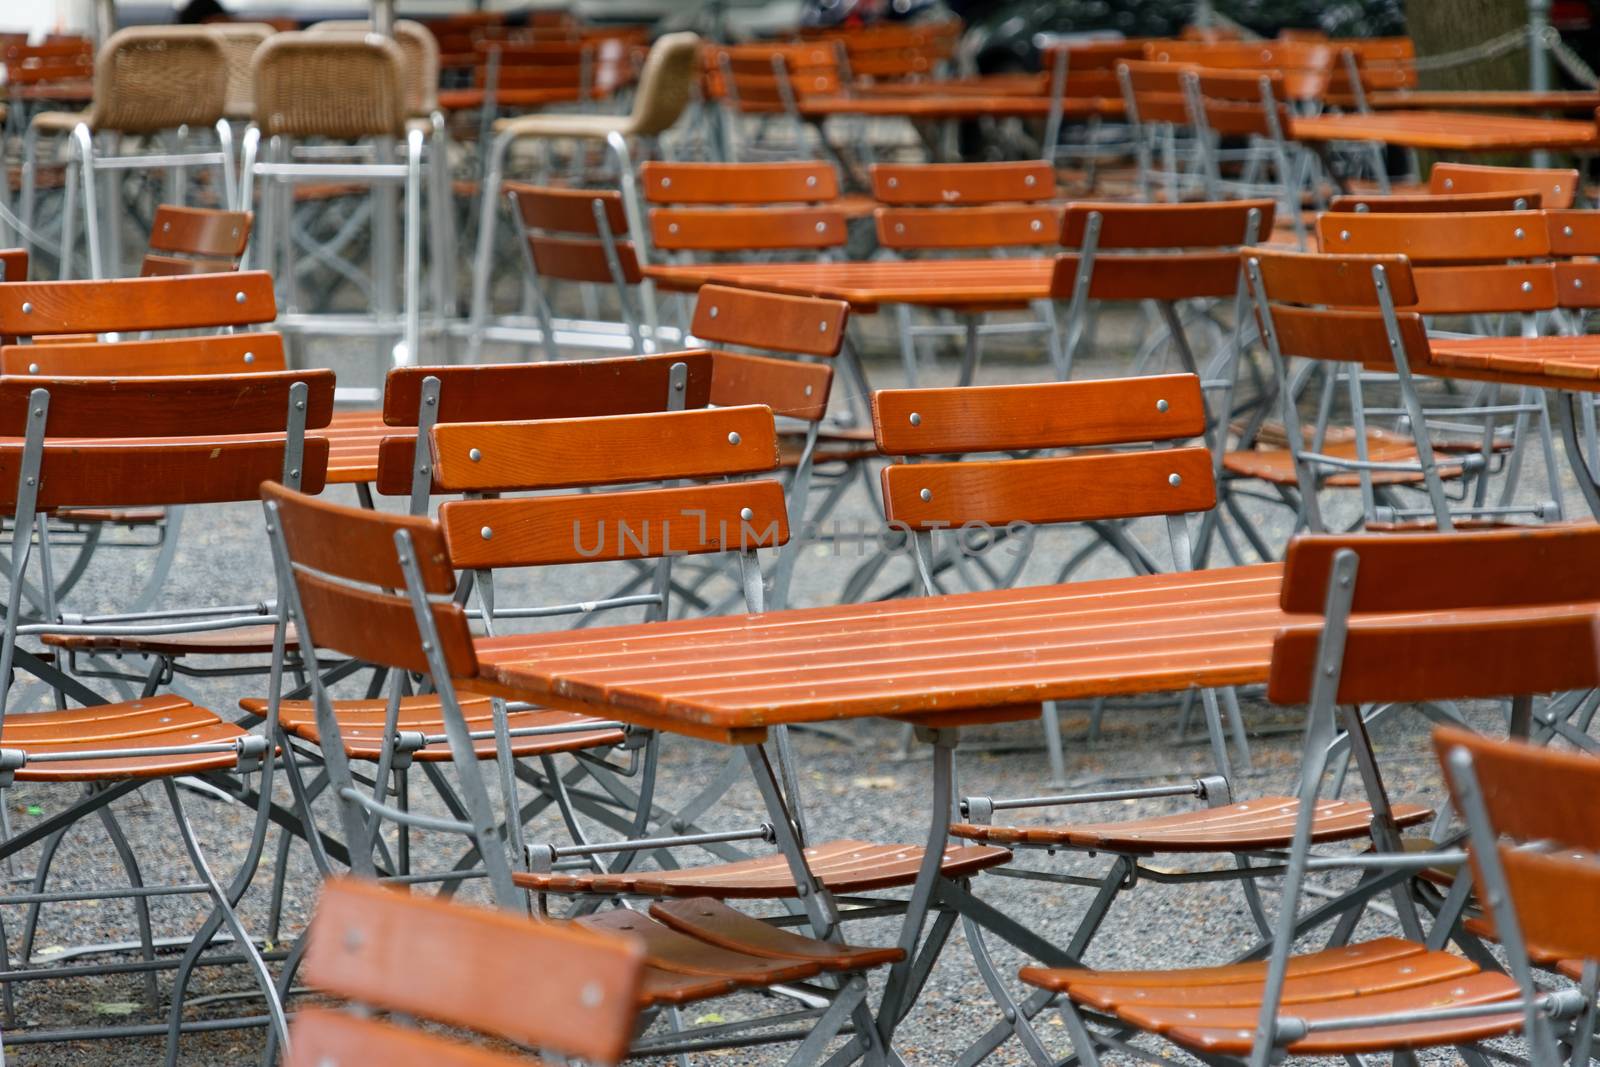 Unoccupied chairs and tables in a garden restaurant with table legs and chair legs made of iron and wooden tops, Germany